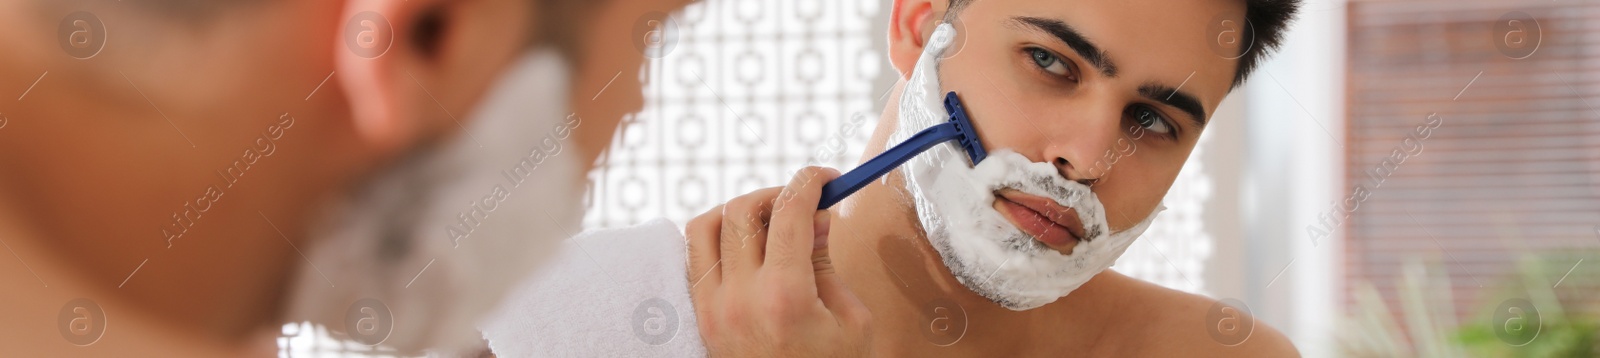 Image of Handsome young man shaving with razor near mirror in bathroom. Banner design